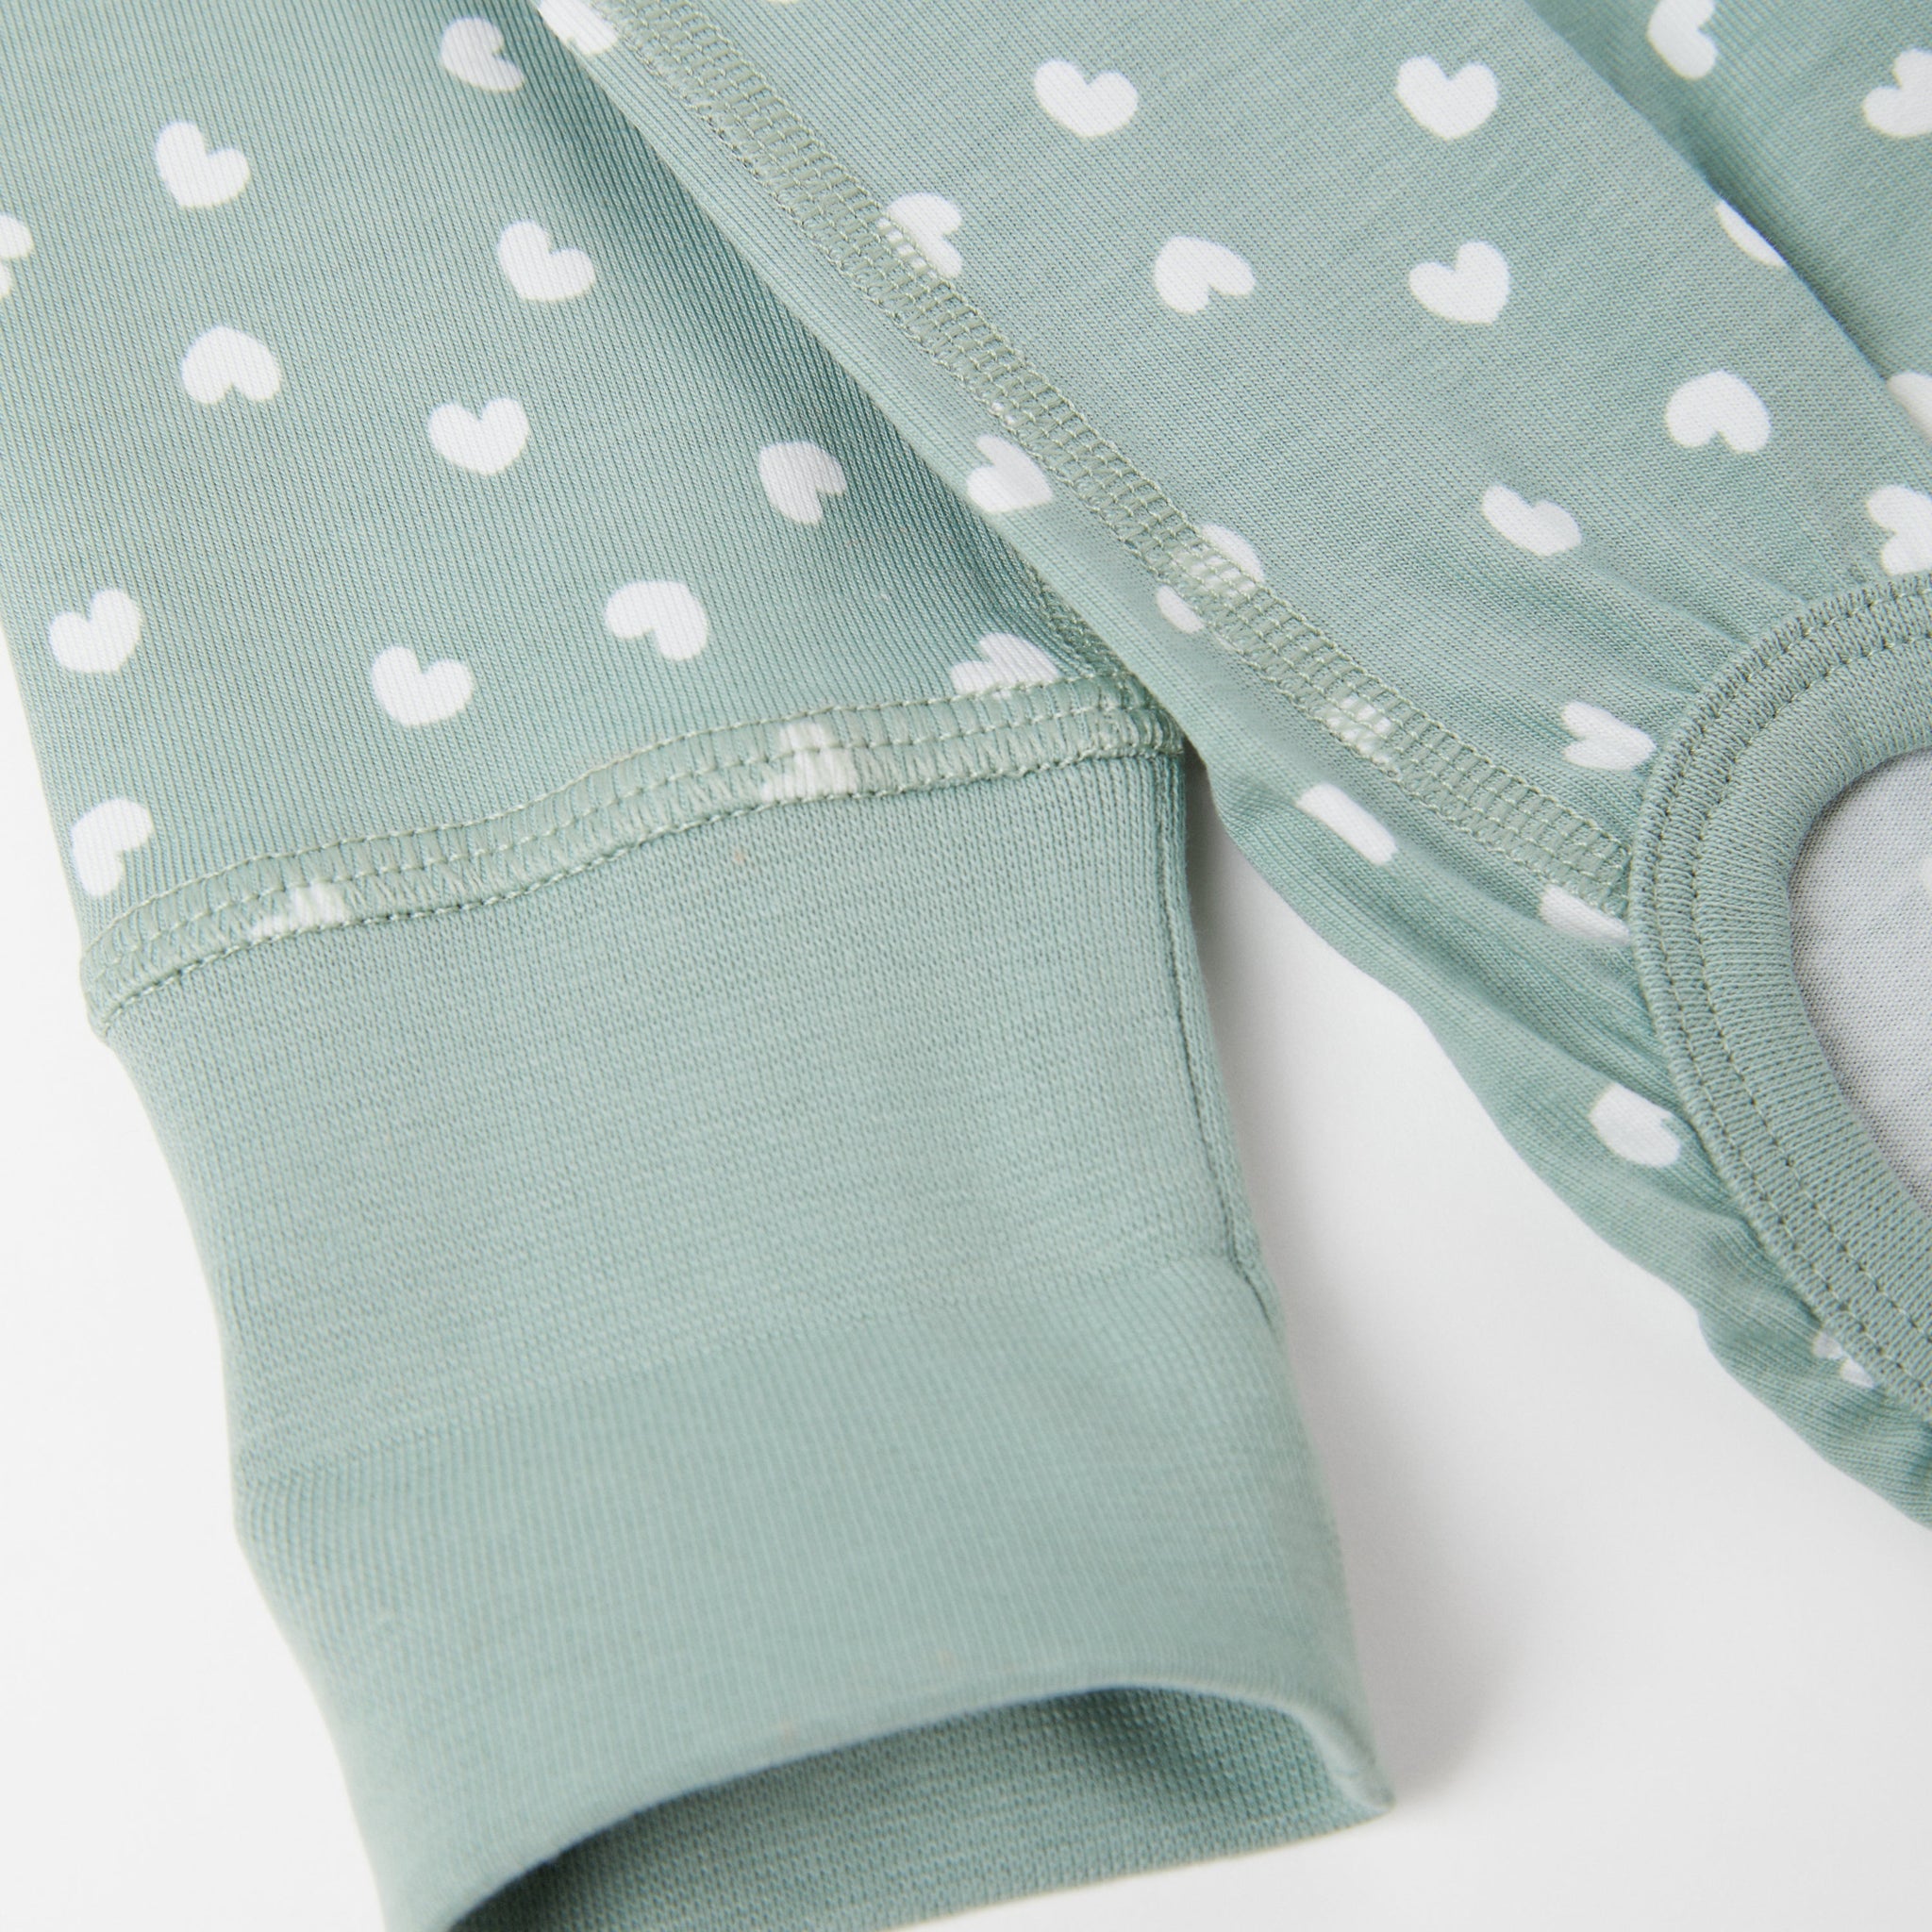 Organic Cotton Heart Print Babygrow from the Polarn O. Pyret Kidswear collection. Ethically produced kids clothing.